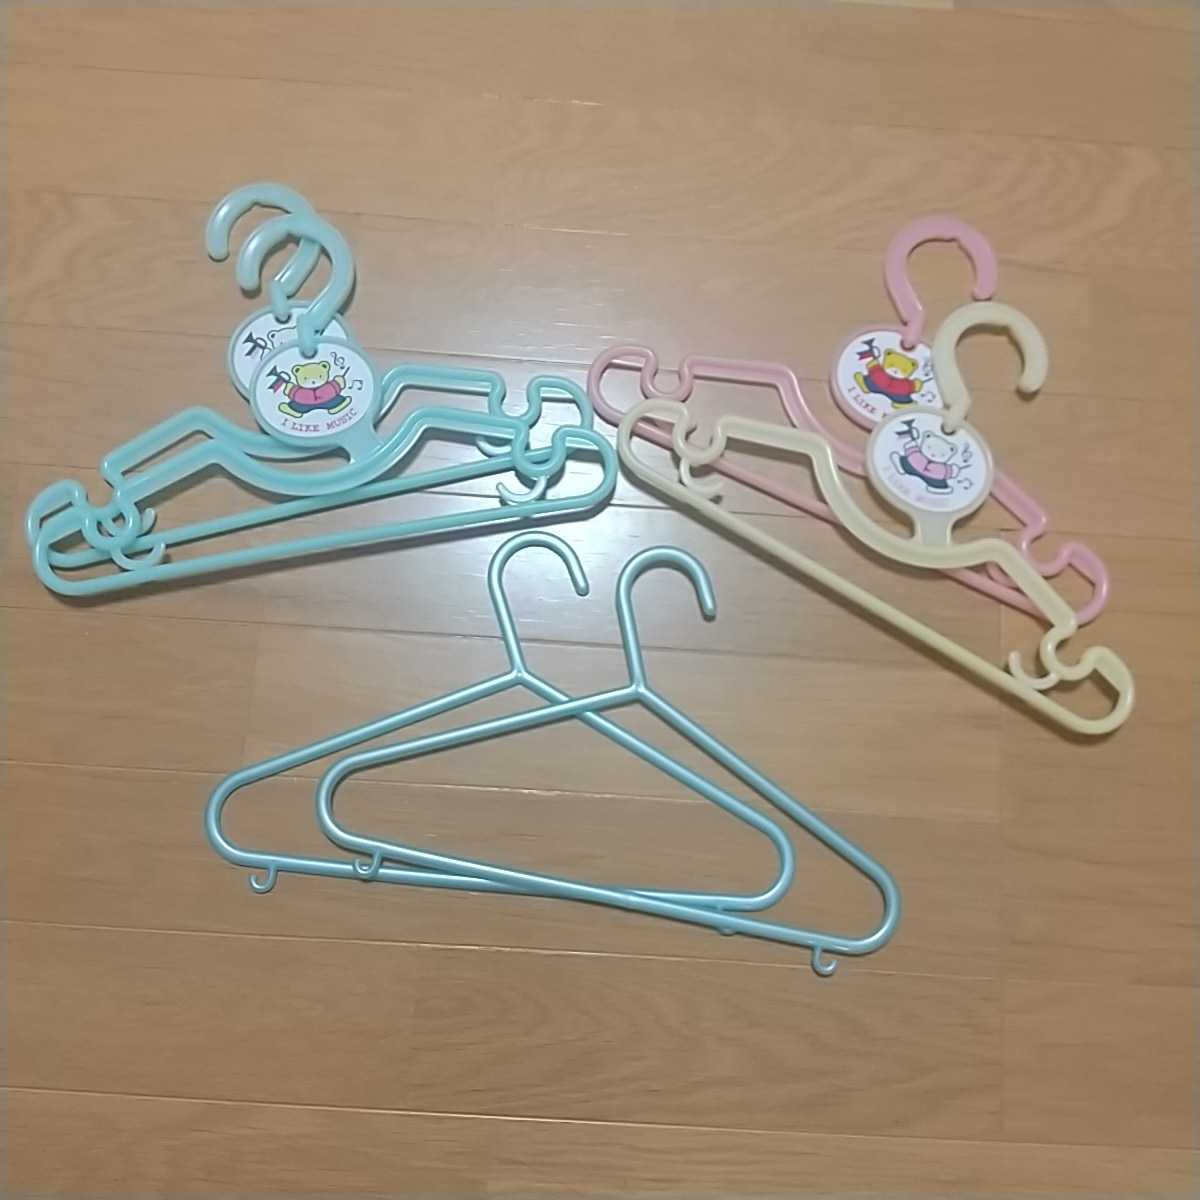 6 baby hangers for baby